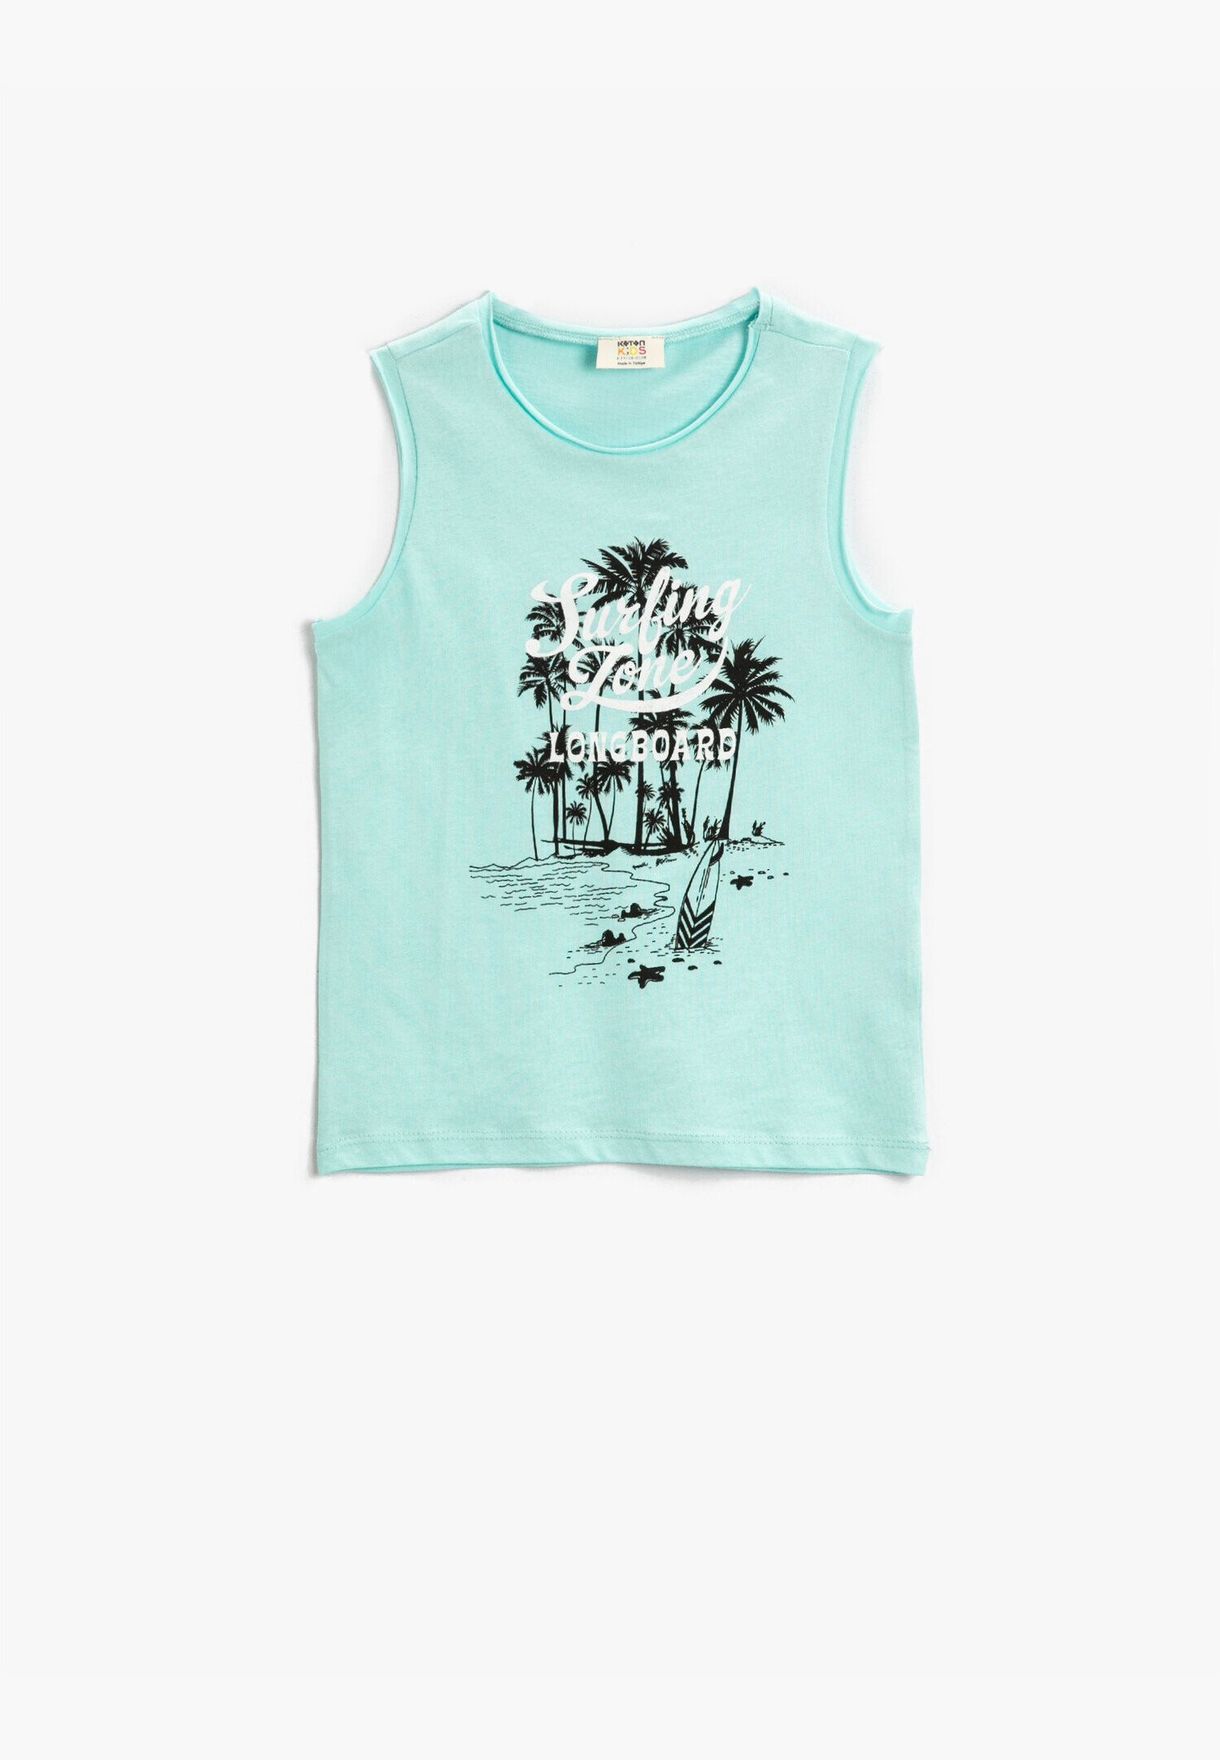 Summer Themed Palm Printed Short Sleeve Crew Neck Top Tank Cotton